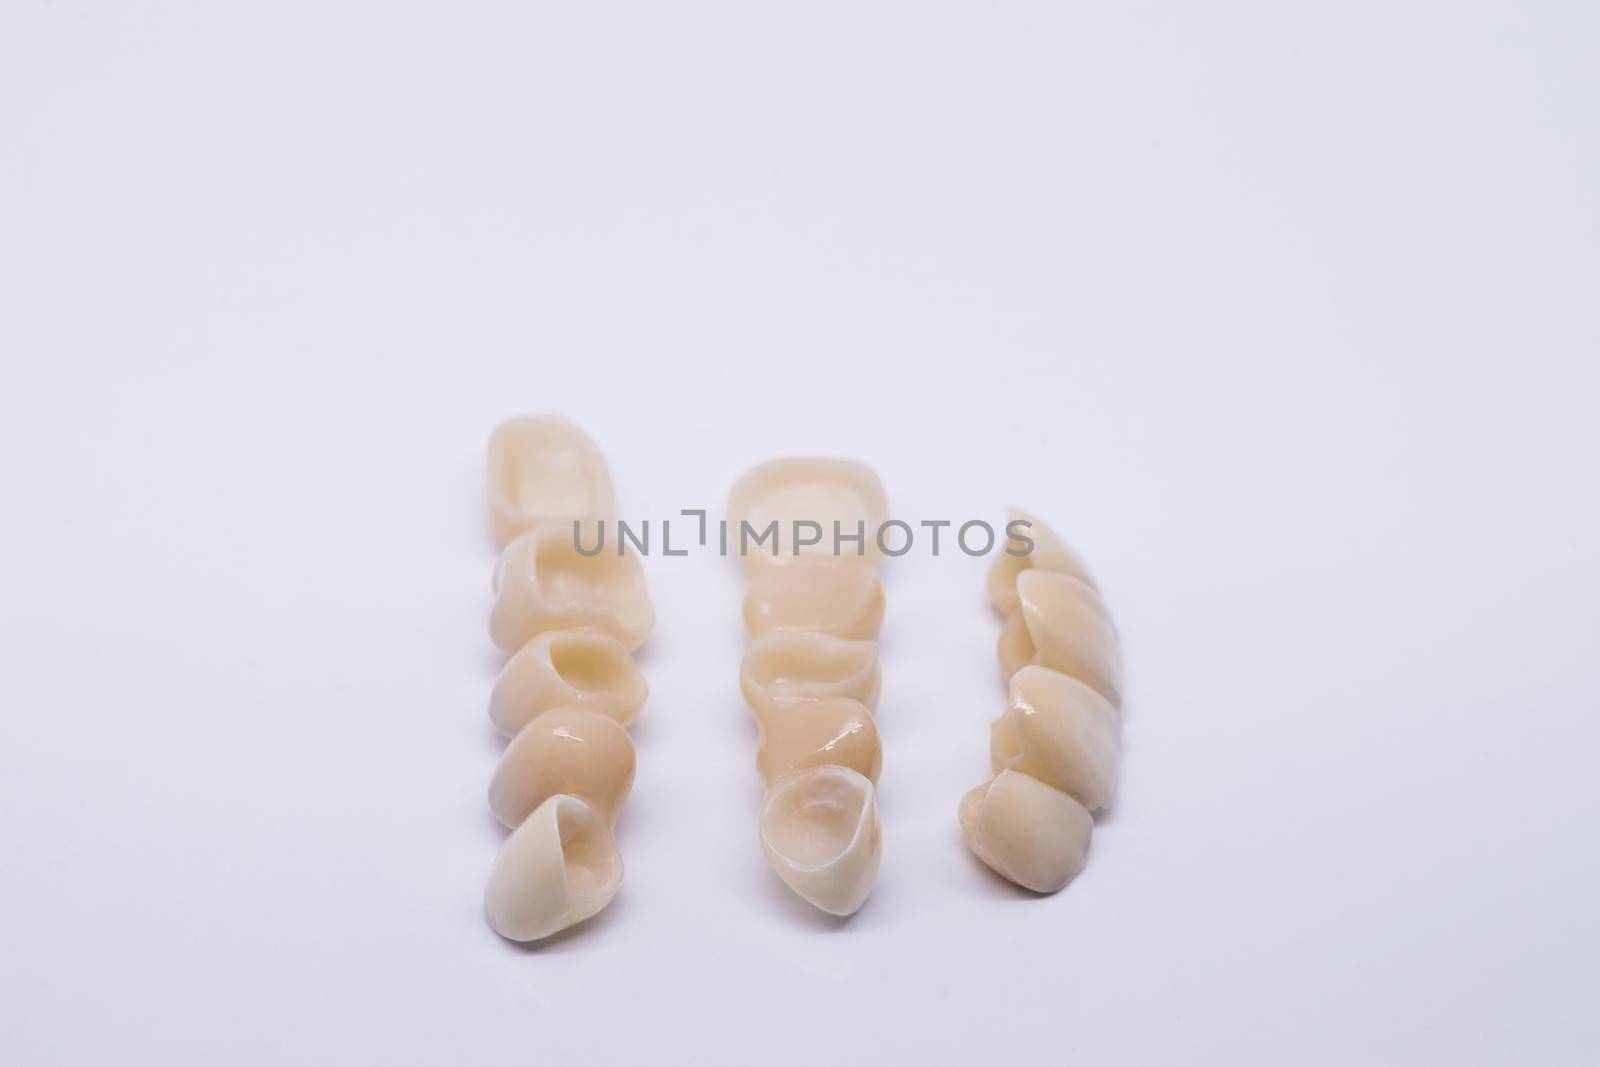 Metal Free Ceramic Dental Crowns. Zirconium tooth crown isolate on wite background. Aesthetic restoration of tooth loss. Ceramic zirconium in final version.